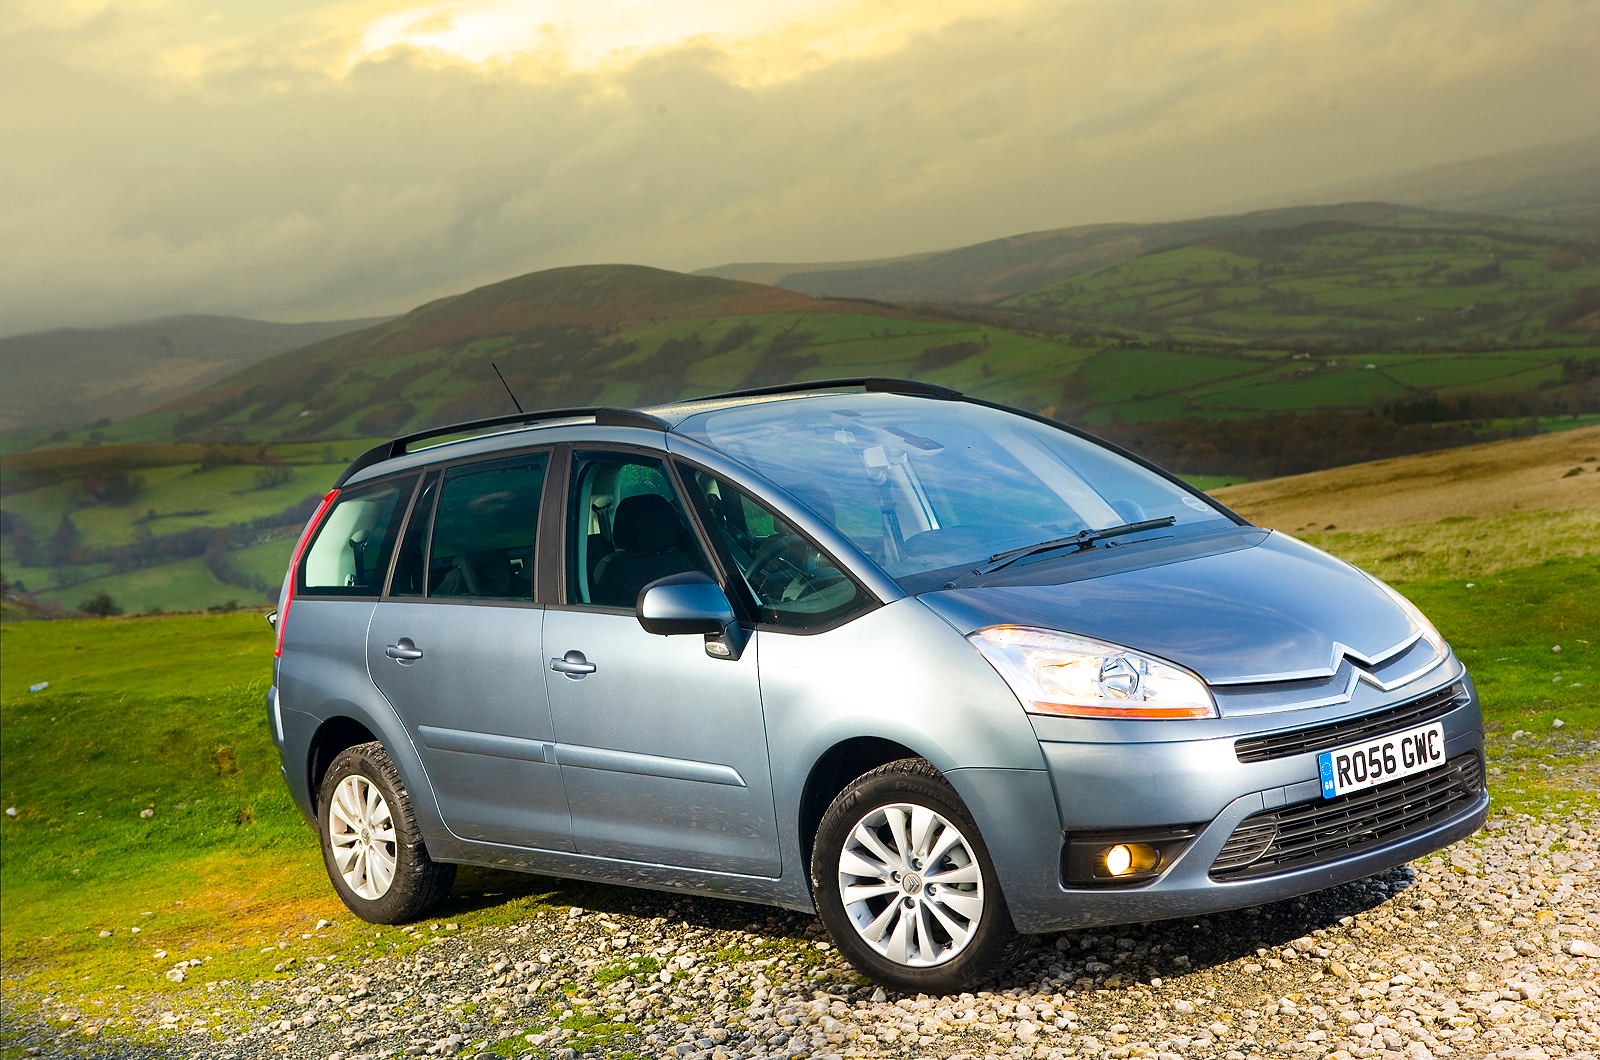 Used Citroen Grand C4 Picasso 2007-2013 review